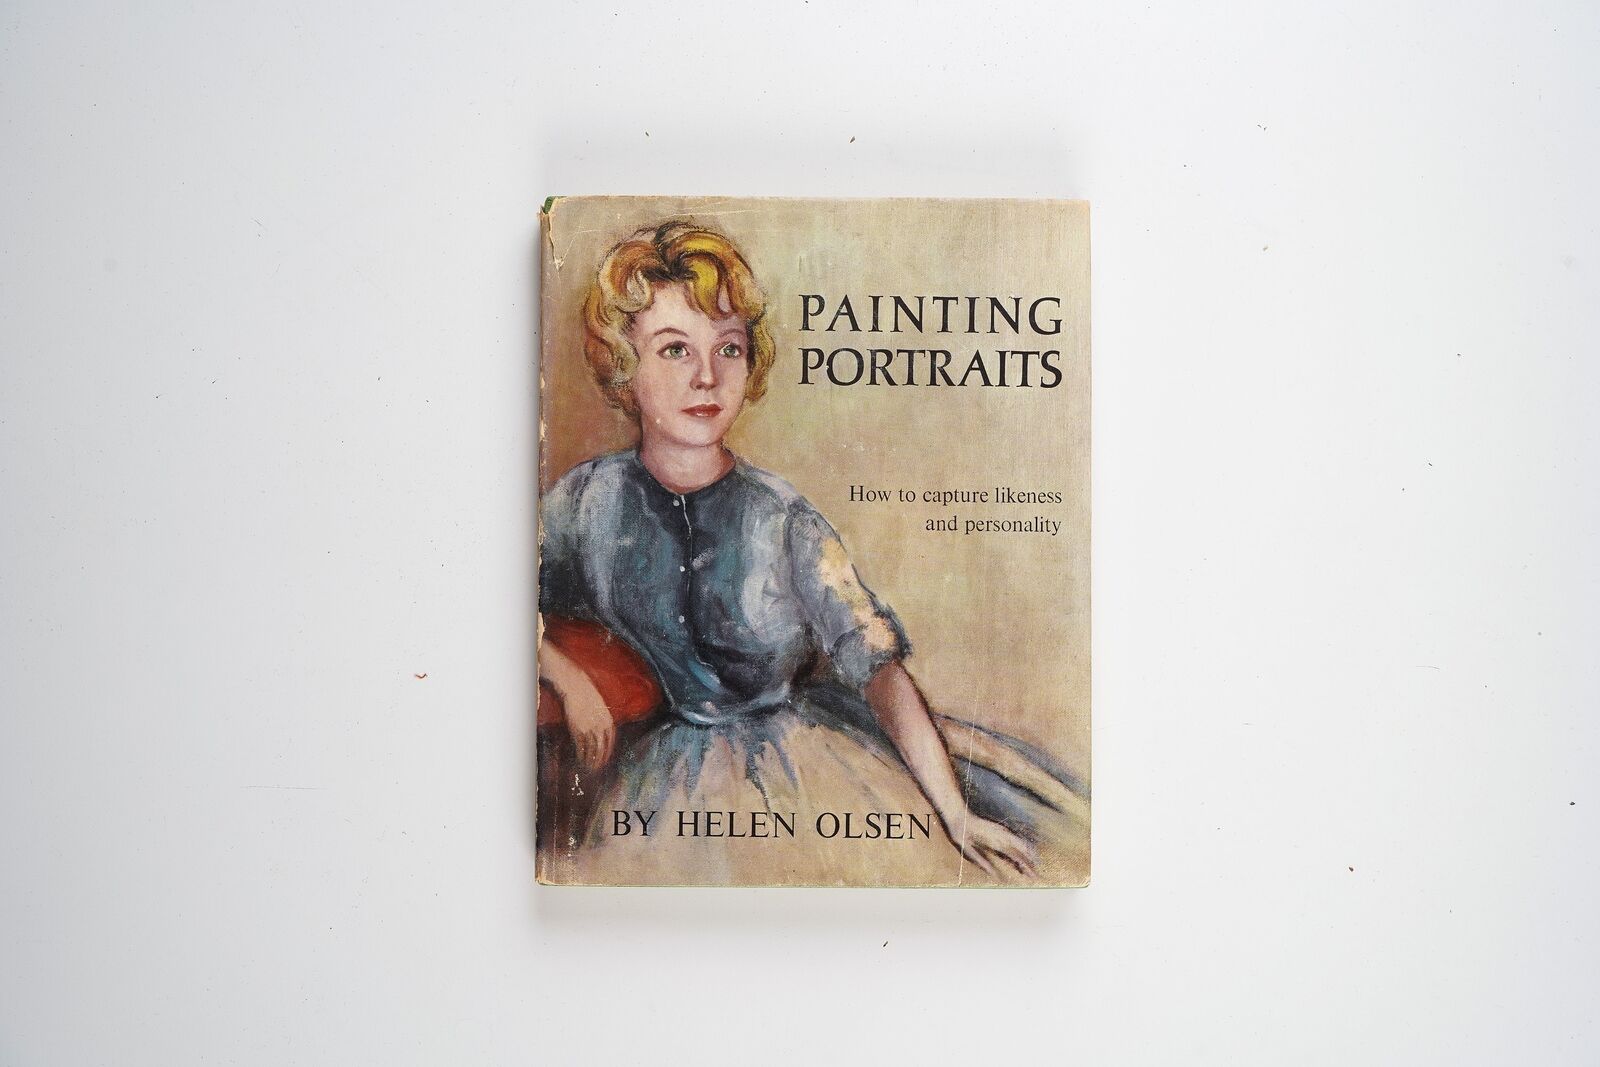 Painting Portraits by Helen Olsen 1963